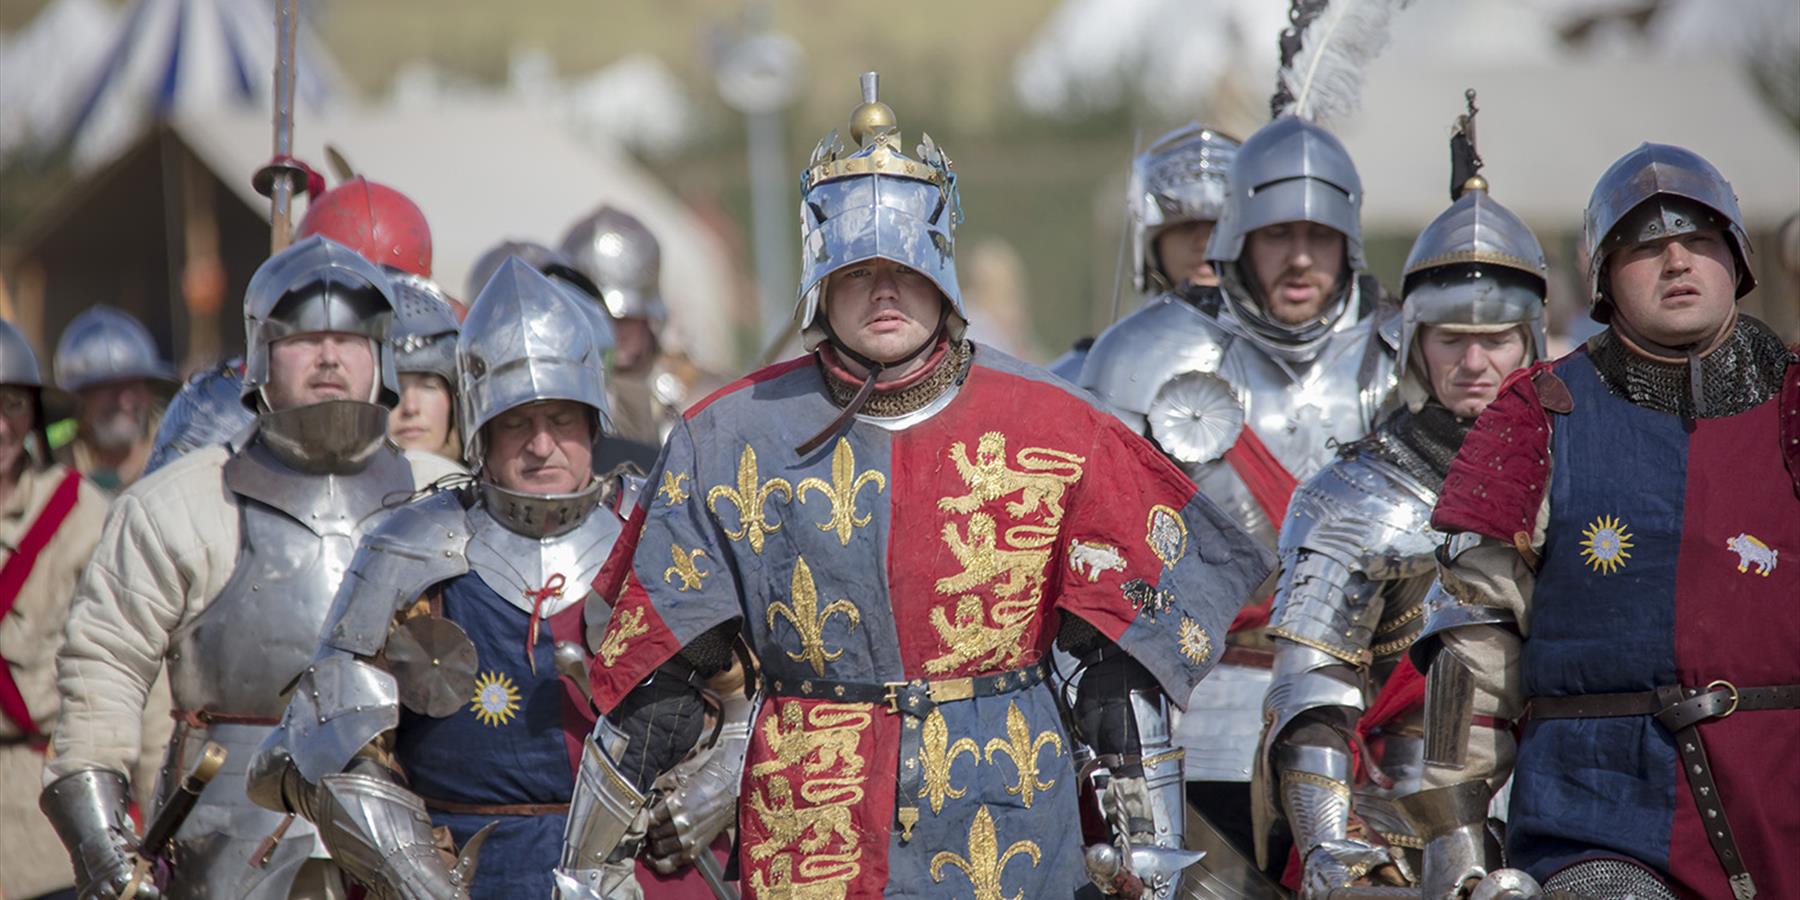 Men in medieval armour